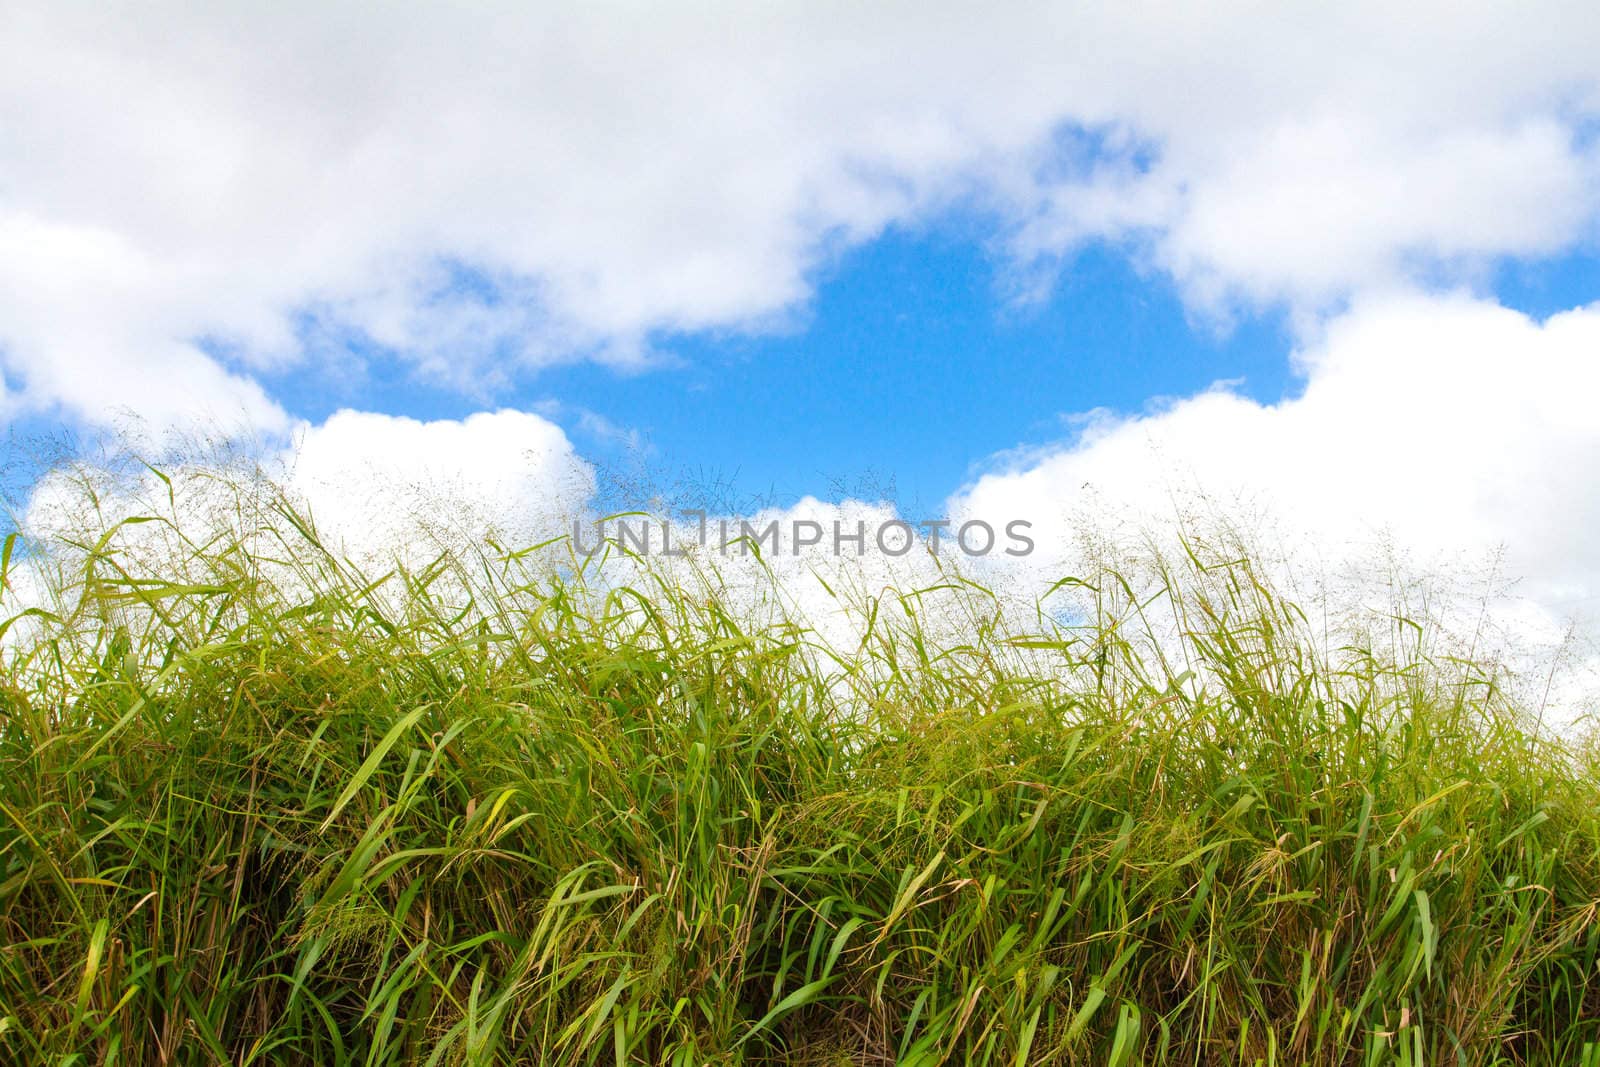 This tropical green grass on the island of Oahu Hawaii is photographed against a bright blue sky with some puffy white clouds.